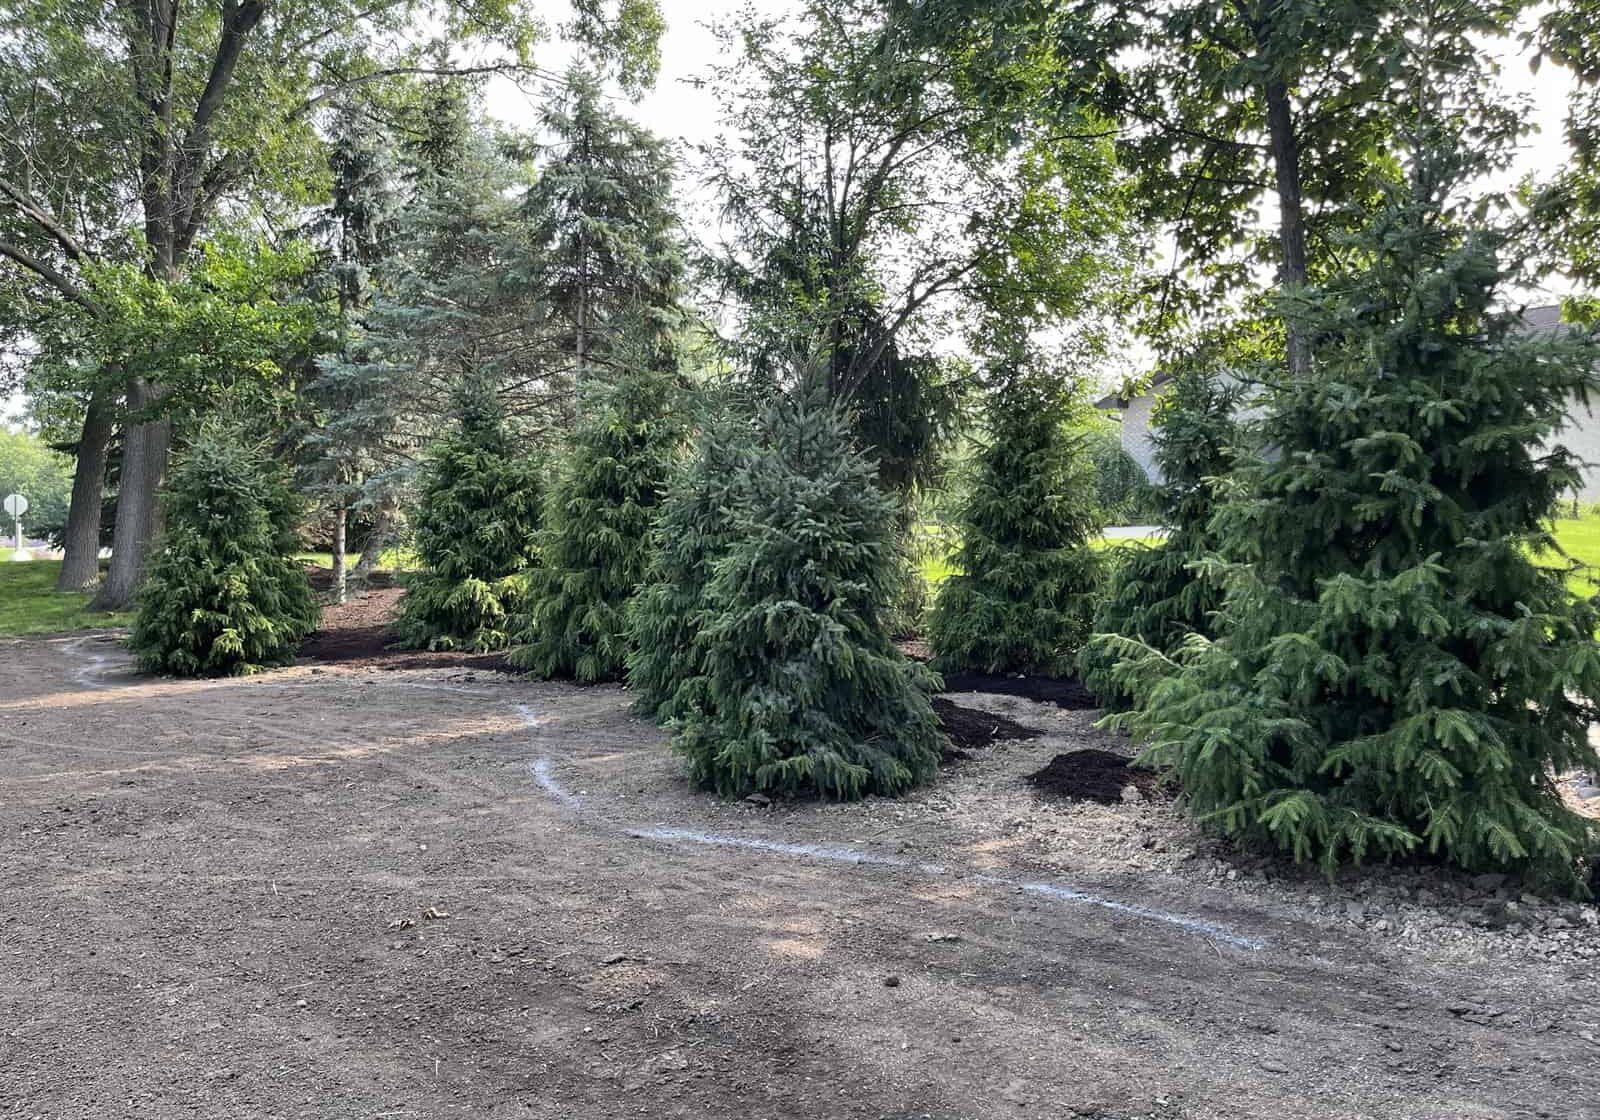 We bring your landscape to life with our tree and shrub installation services, carefully selecting and placing greenery to enhance the beauty and balance of your outdoor environment, while also providing shade relief, privacy, and seasonal color.  